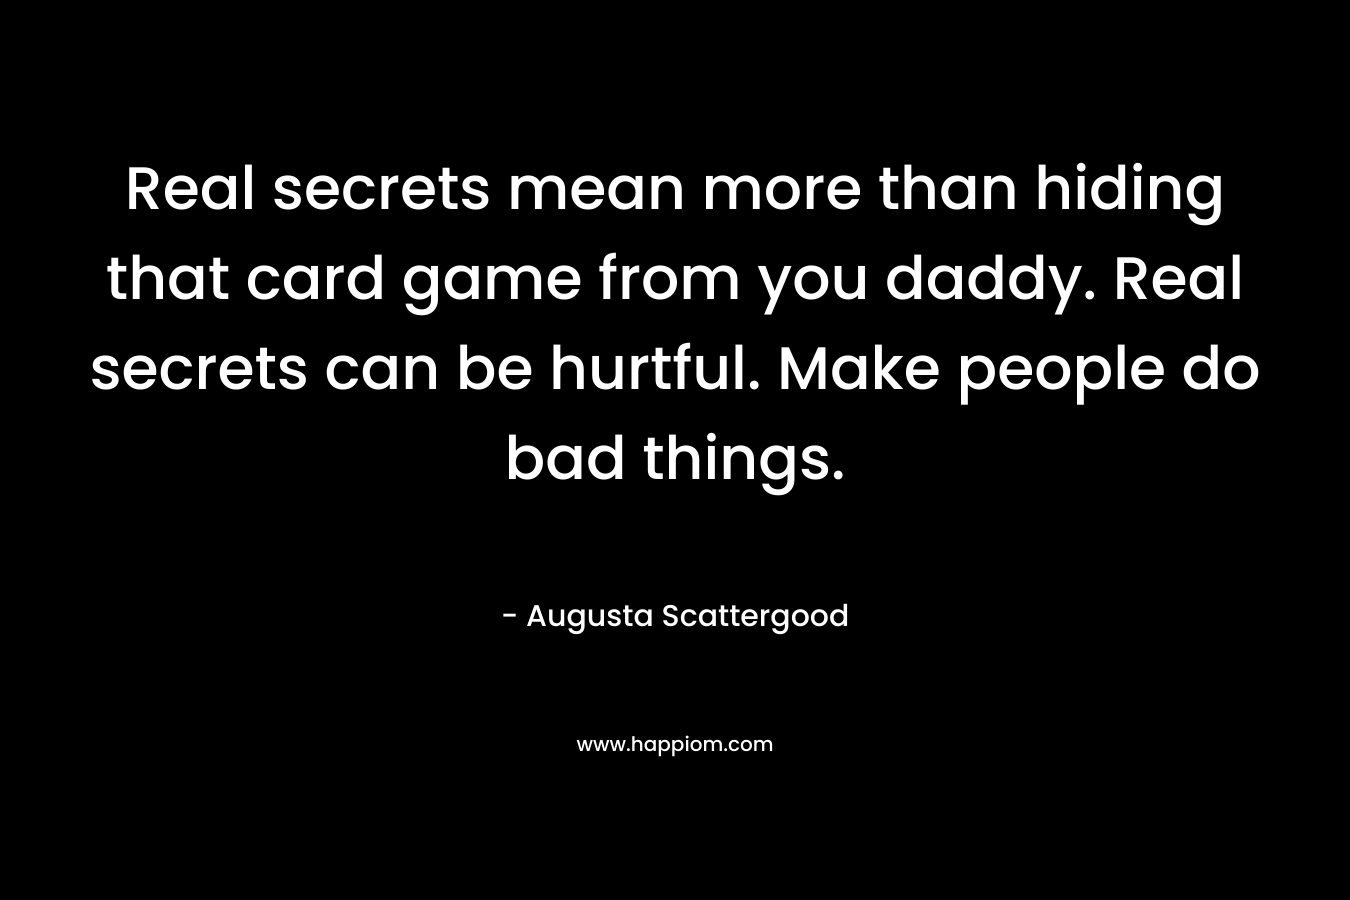 Real secrets mean more than hiding that card game from you daddy. Real secrets can be hurtful. Make people do bad things.